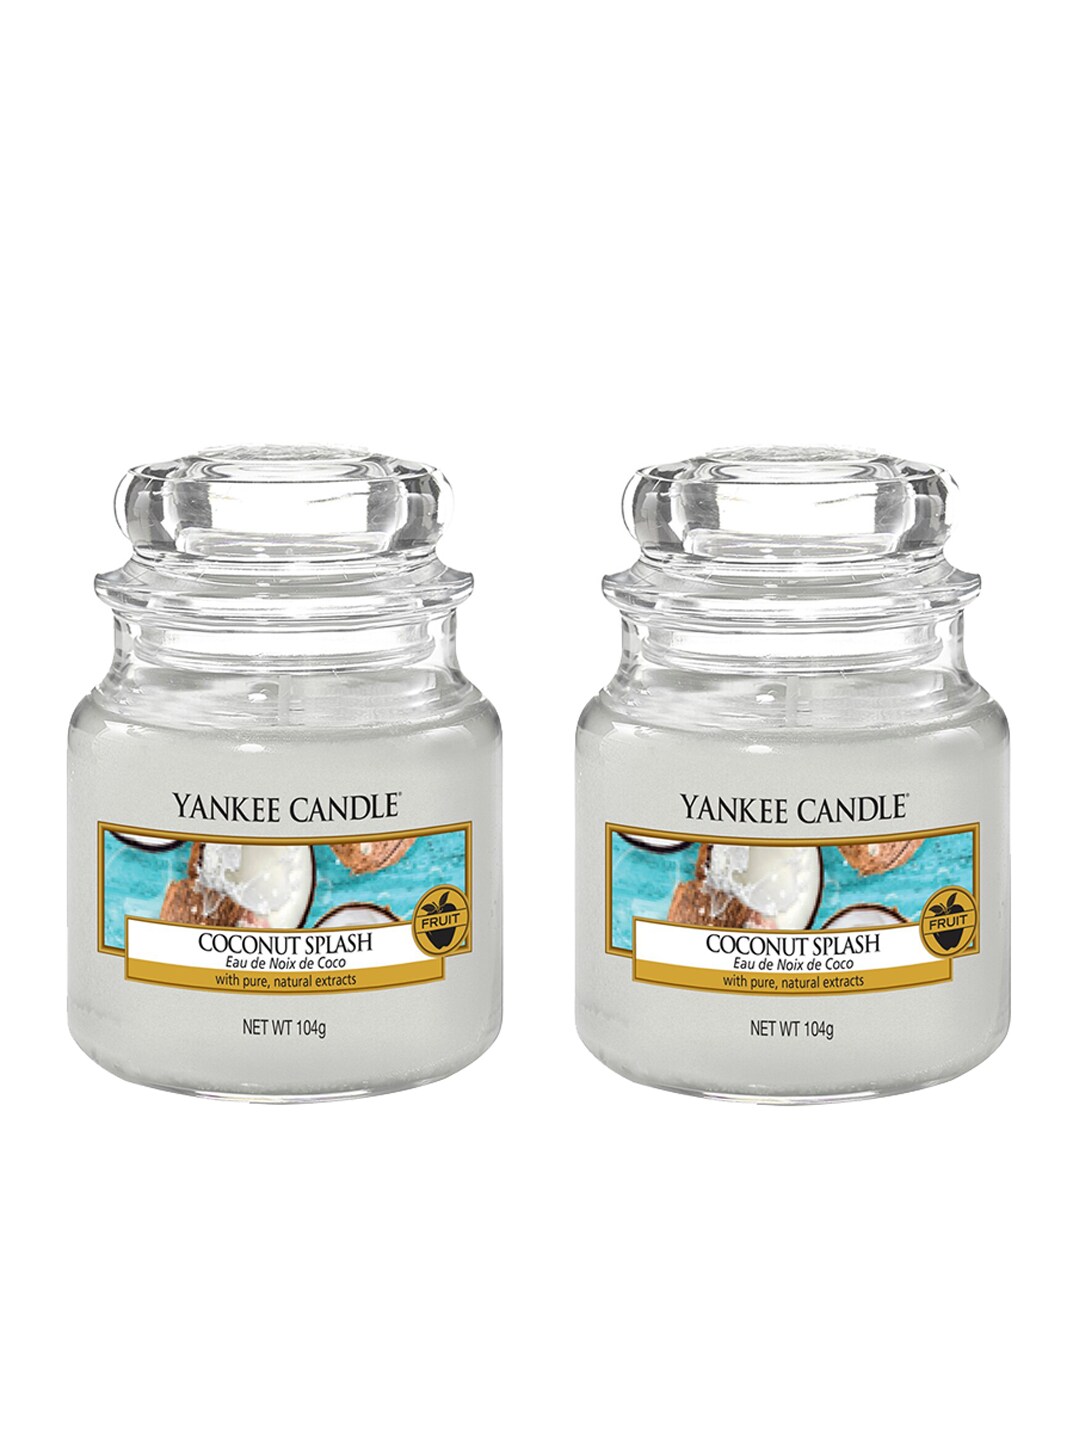 YANKEE CANDLE Set Of 2 Coconut Splash Scented Candles With Classic Jar Price in India